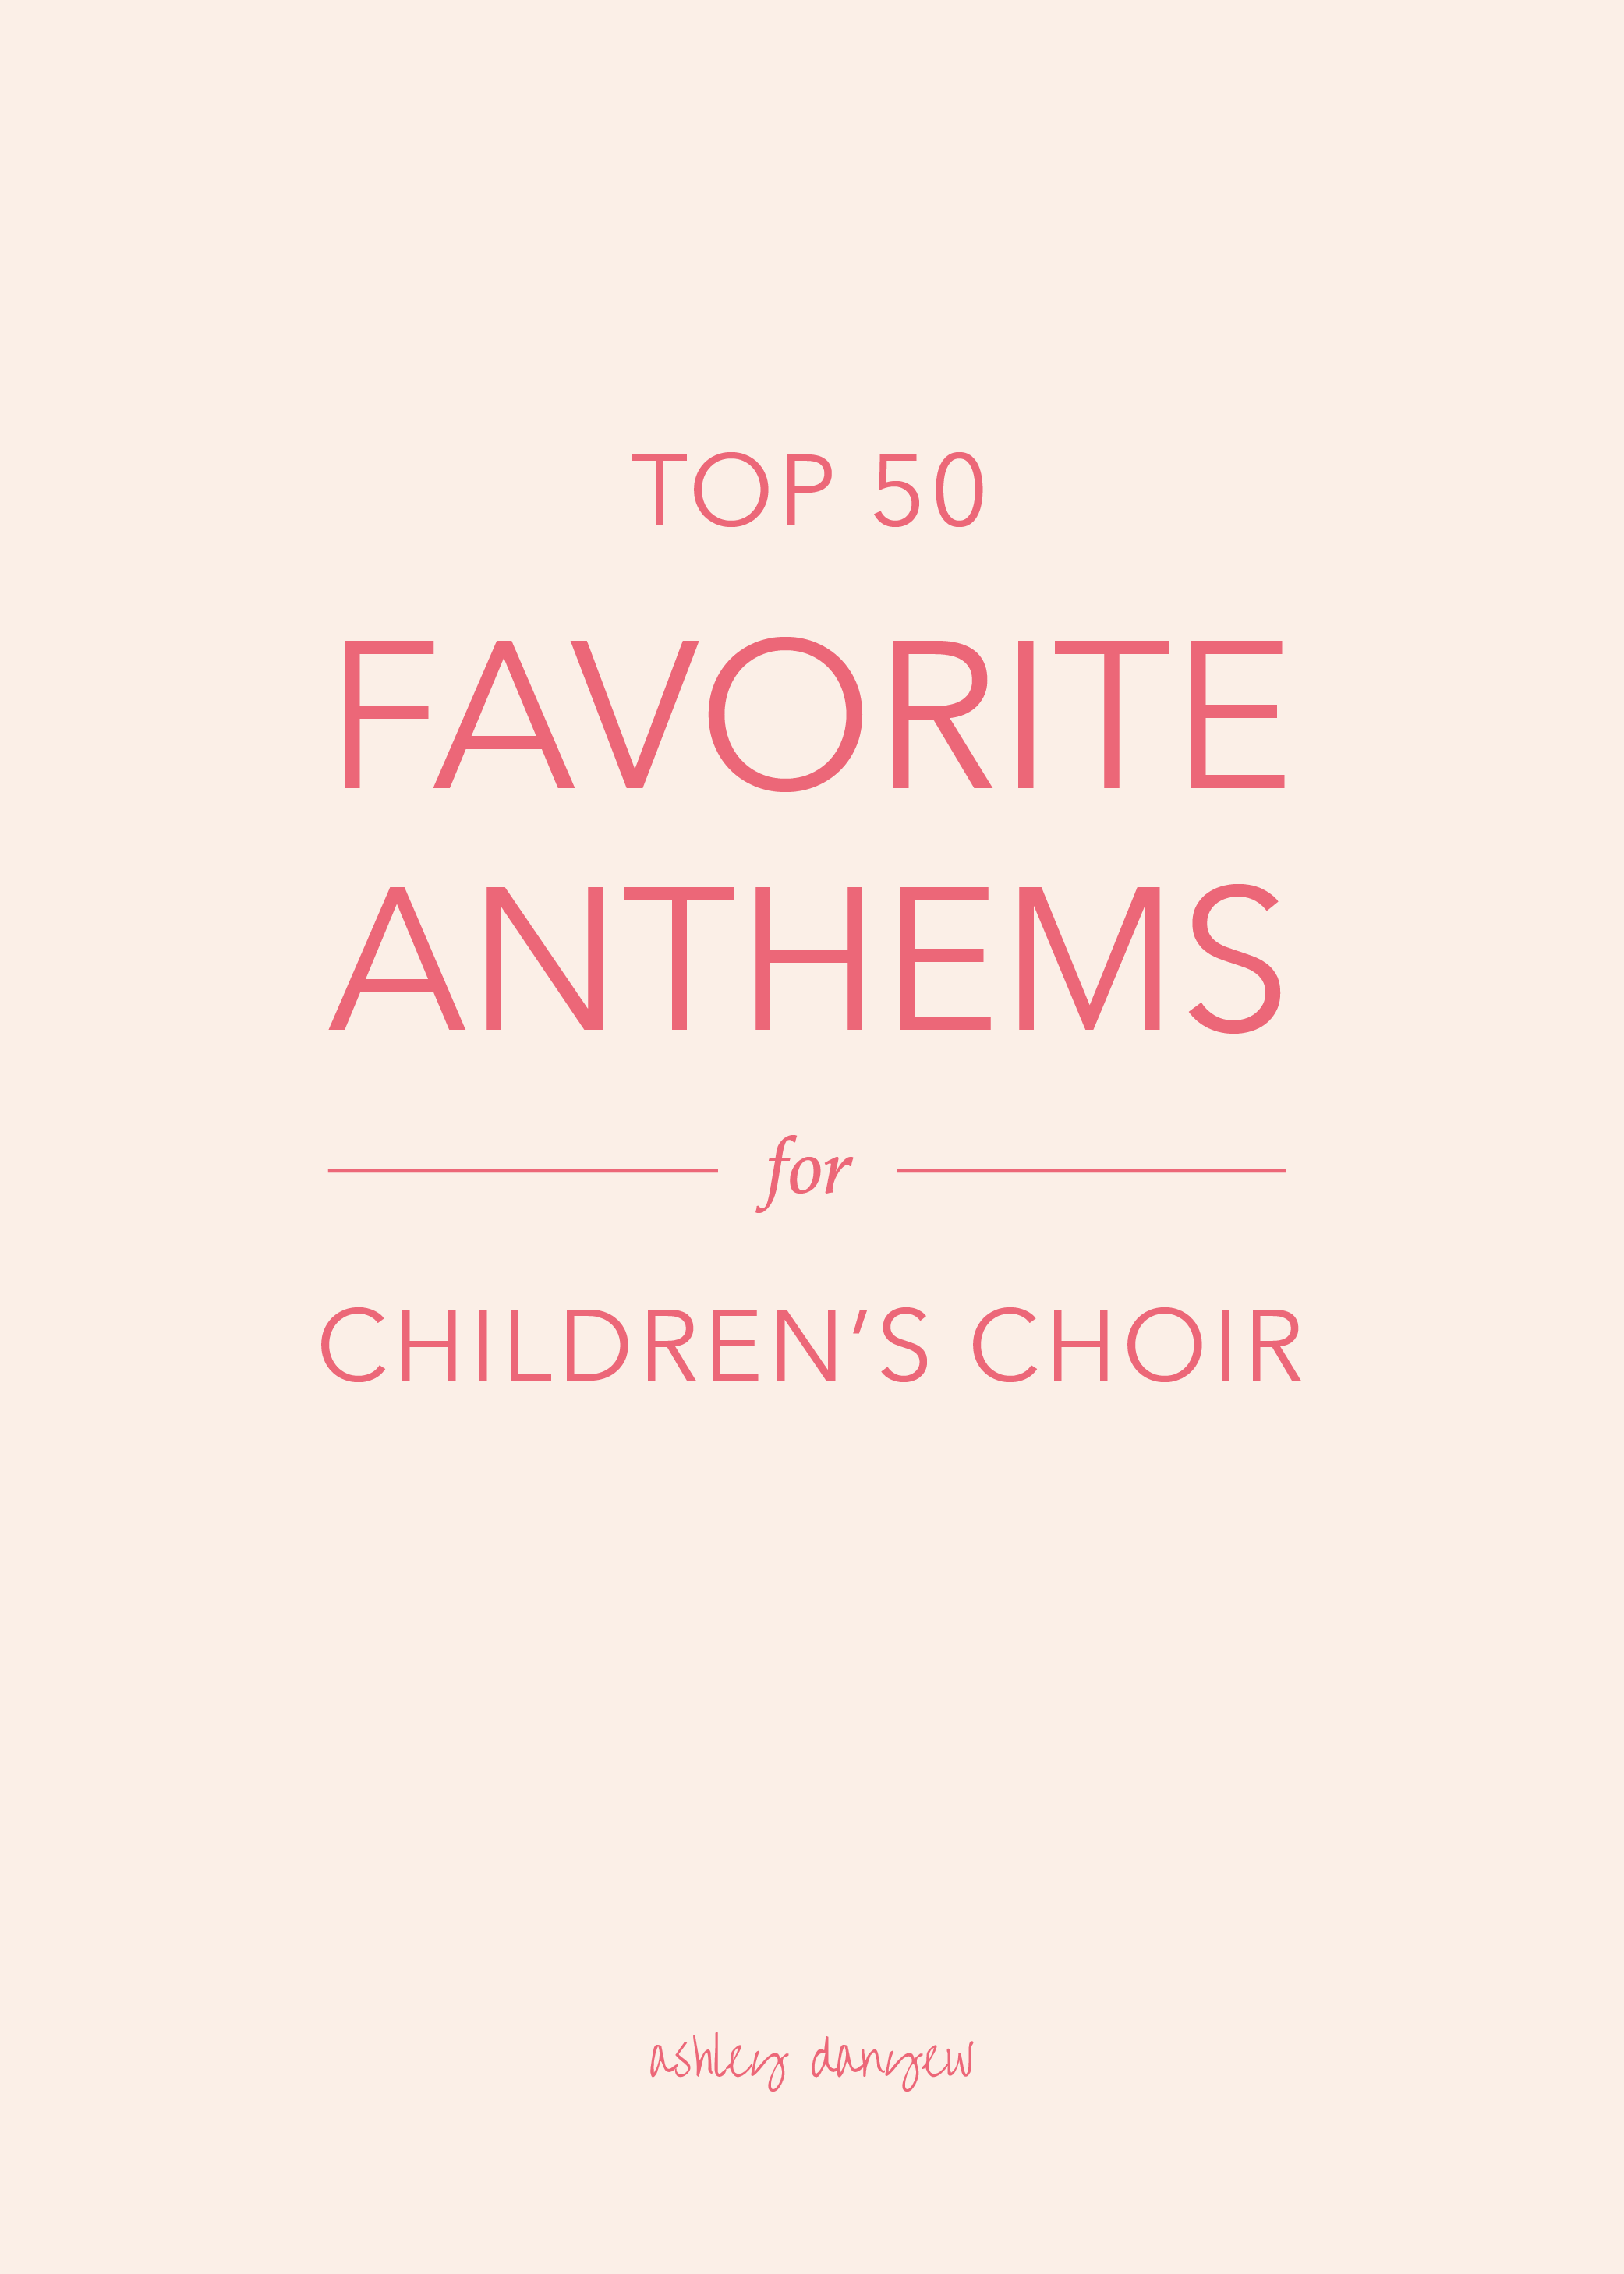 Top 50 Favorite Anthems for Children's Choir-01.png